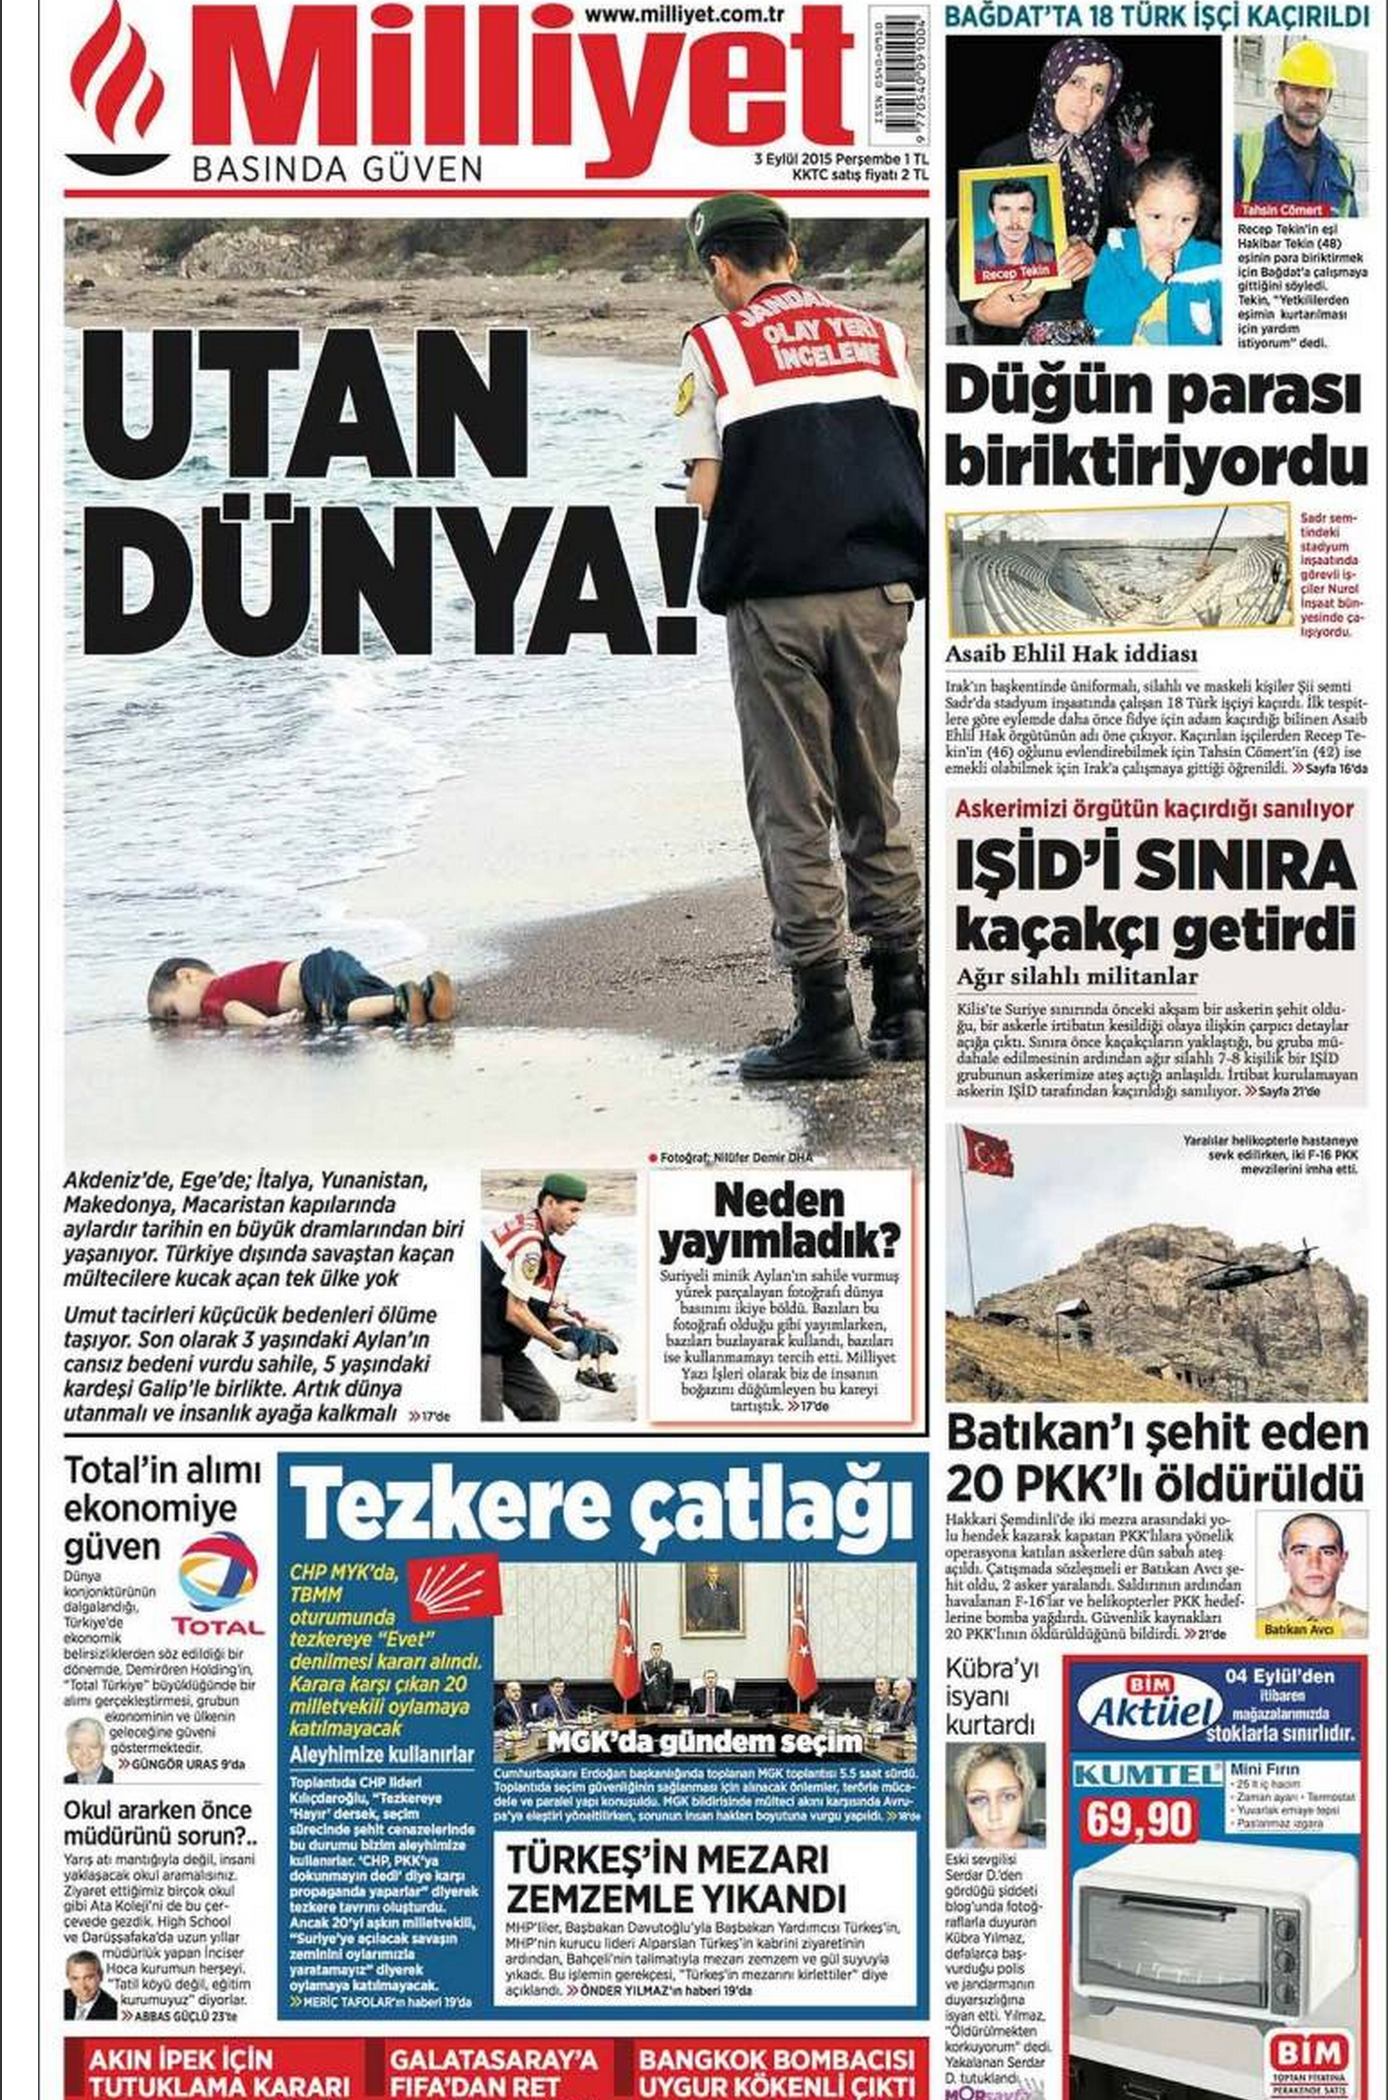 Drowned Migrant Boy Milliyet front page